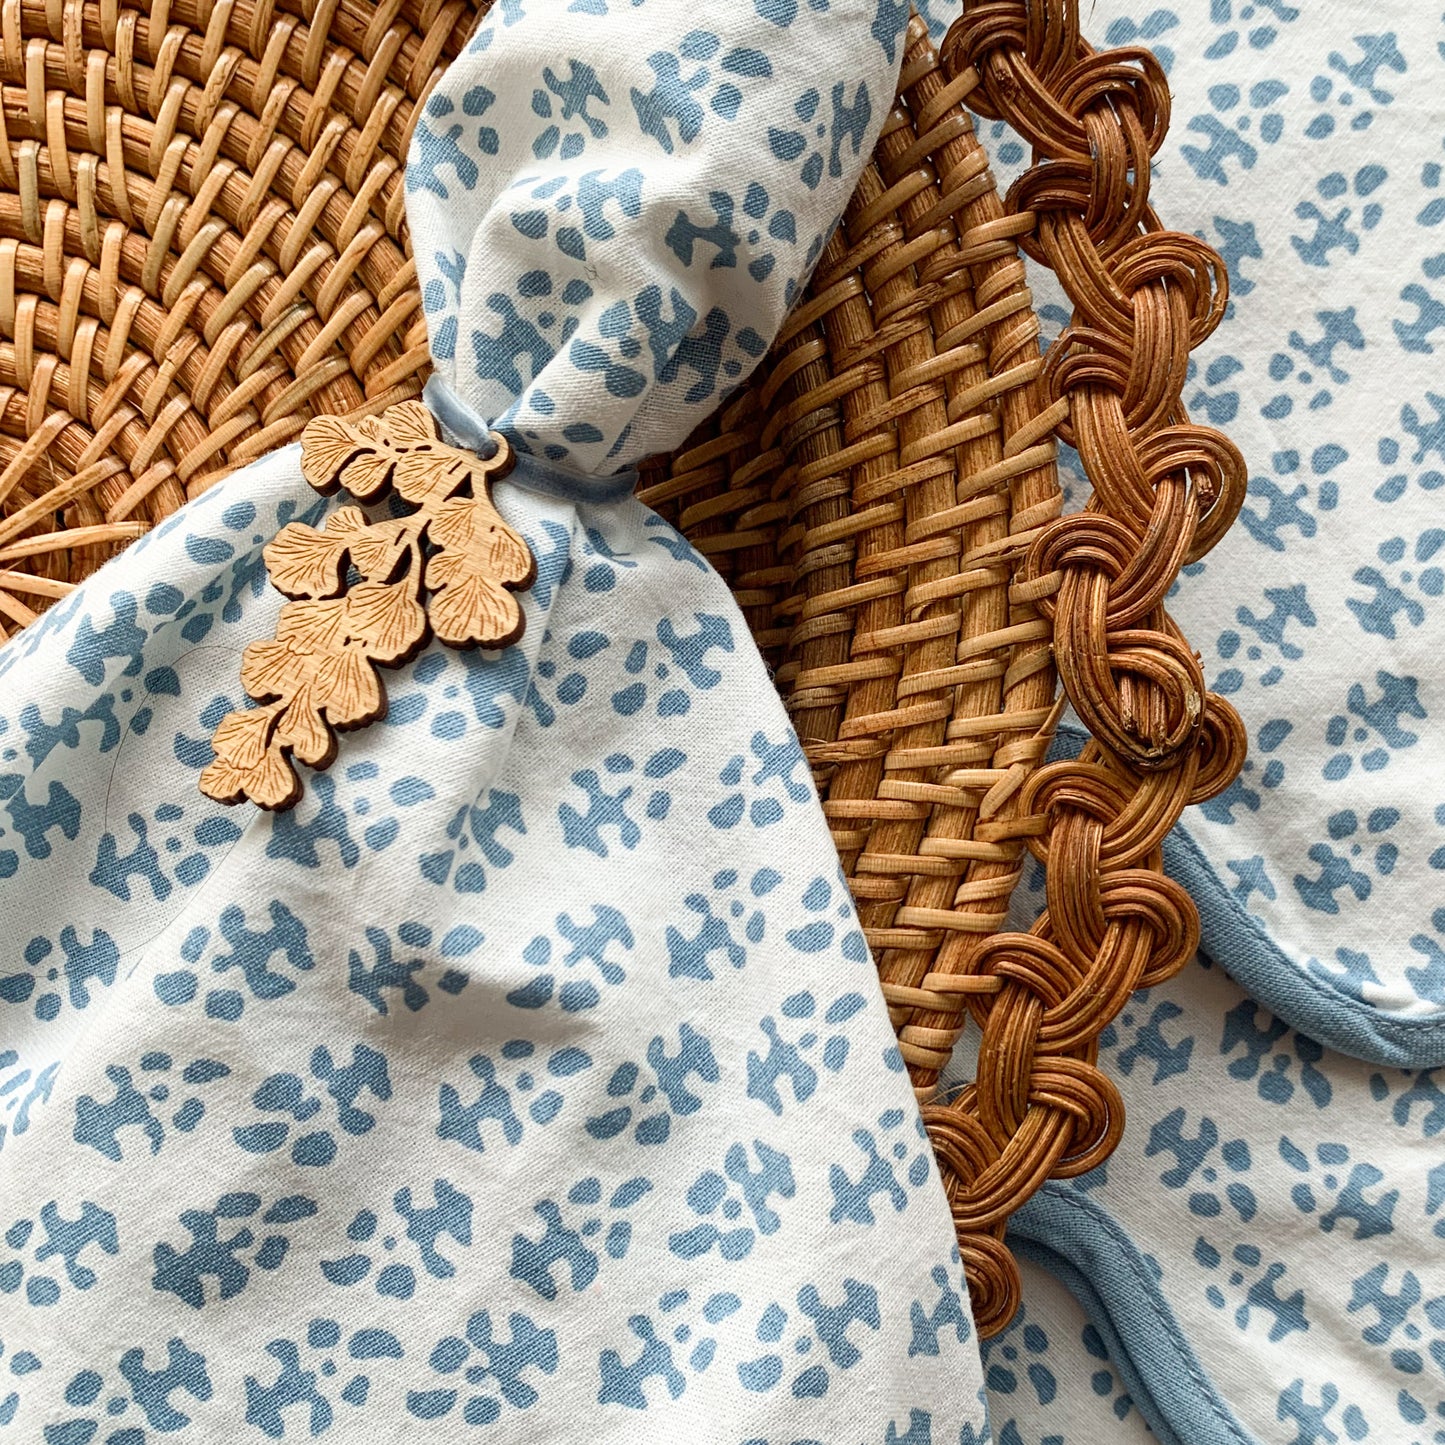 Rattan charger with white and light blue batik patterned cloth napkin with light blue scalloped edge and laser cut maiden hair fern napkin charm.